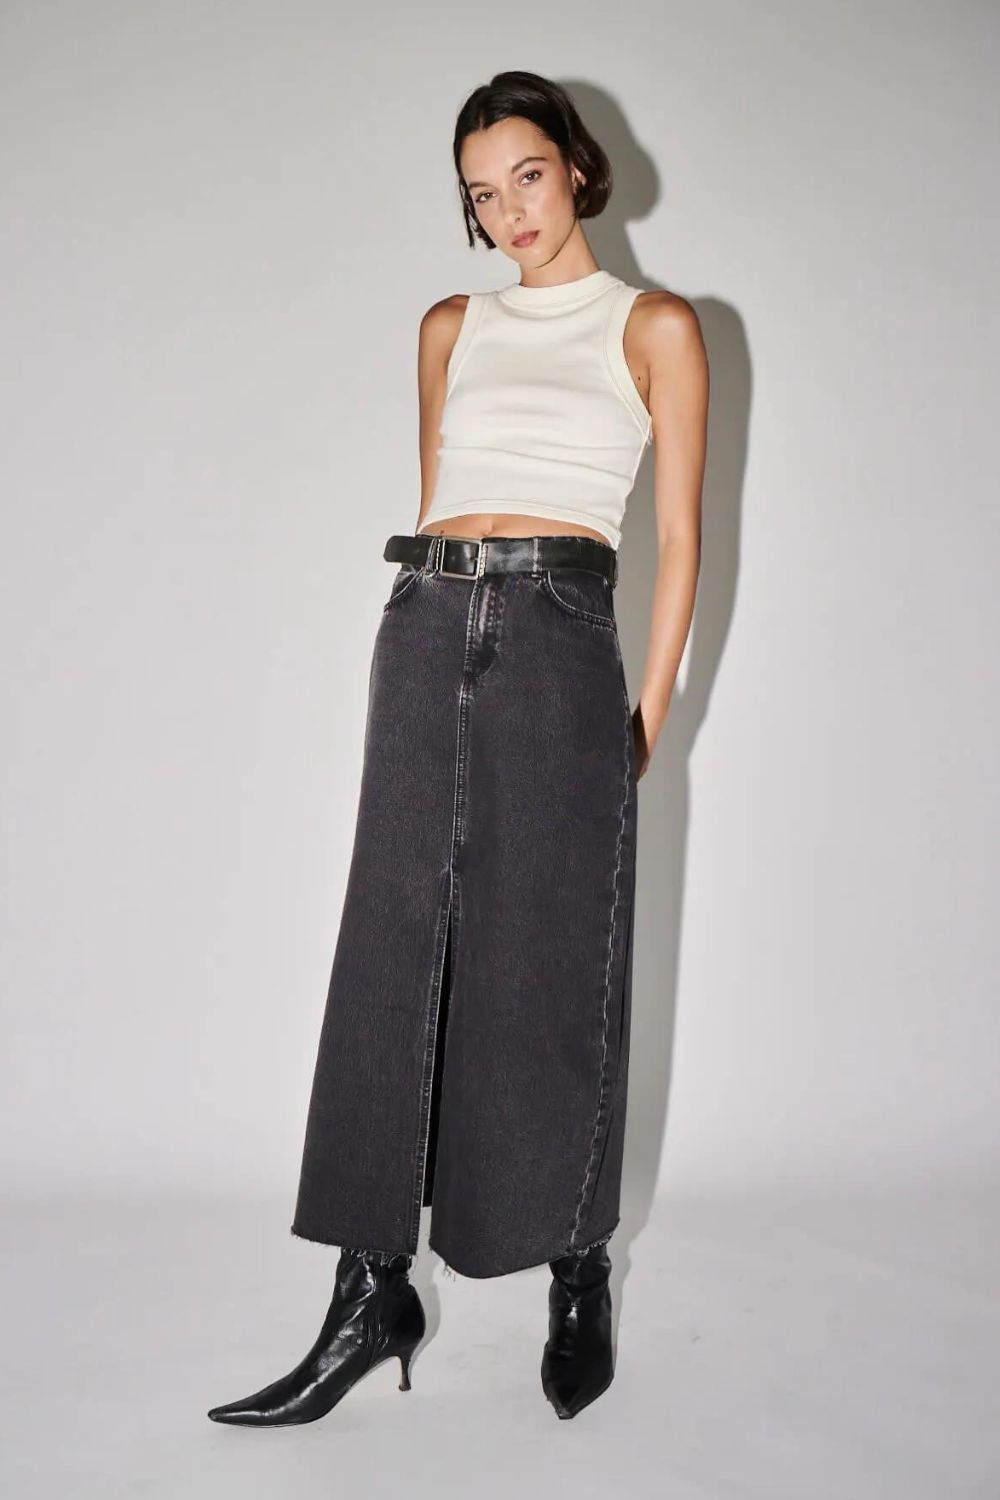 The Darcy Maxi Skirt from Neuw is a great example of a denim maxi pencil skirt.